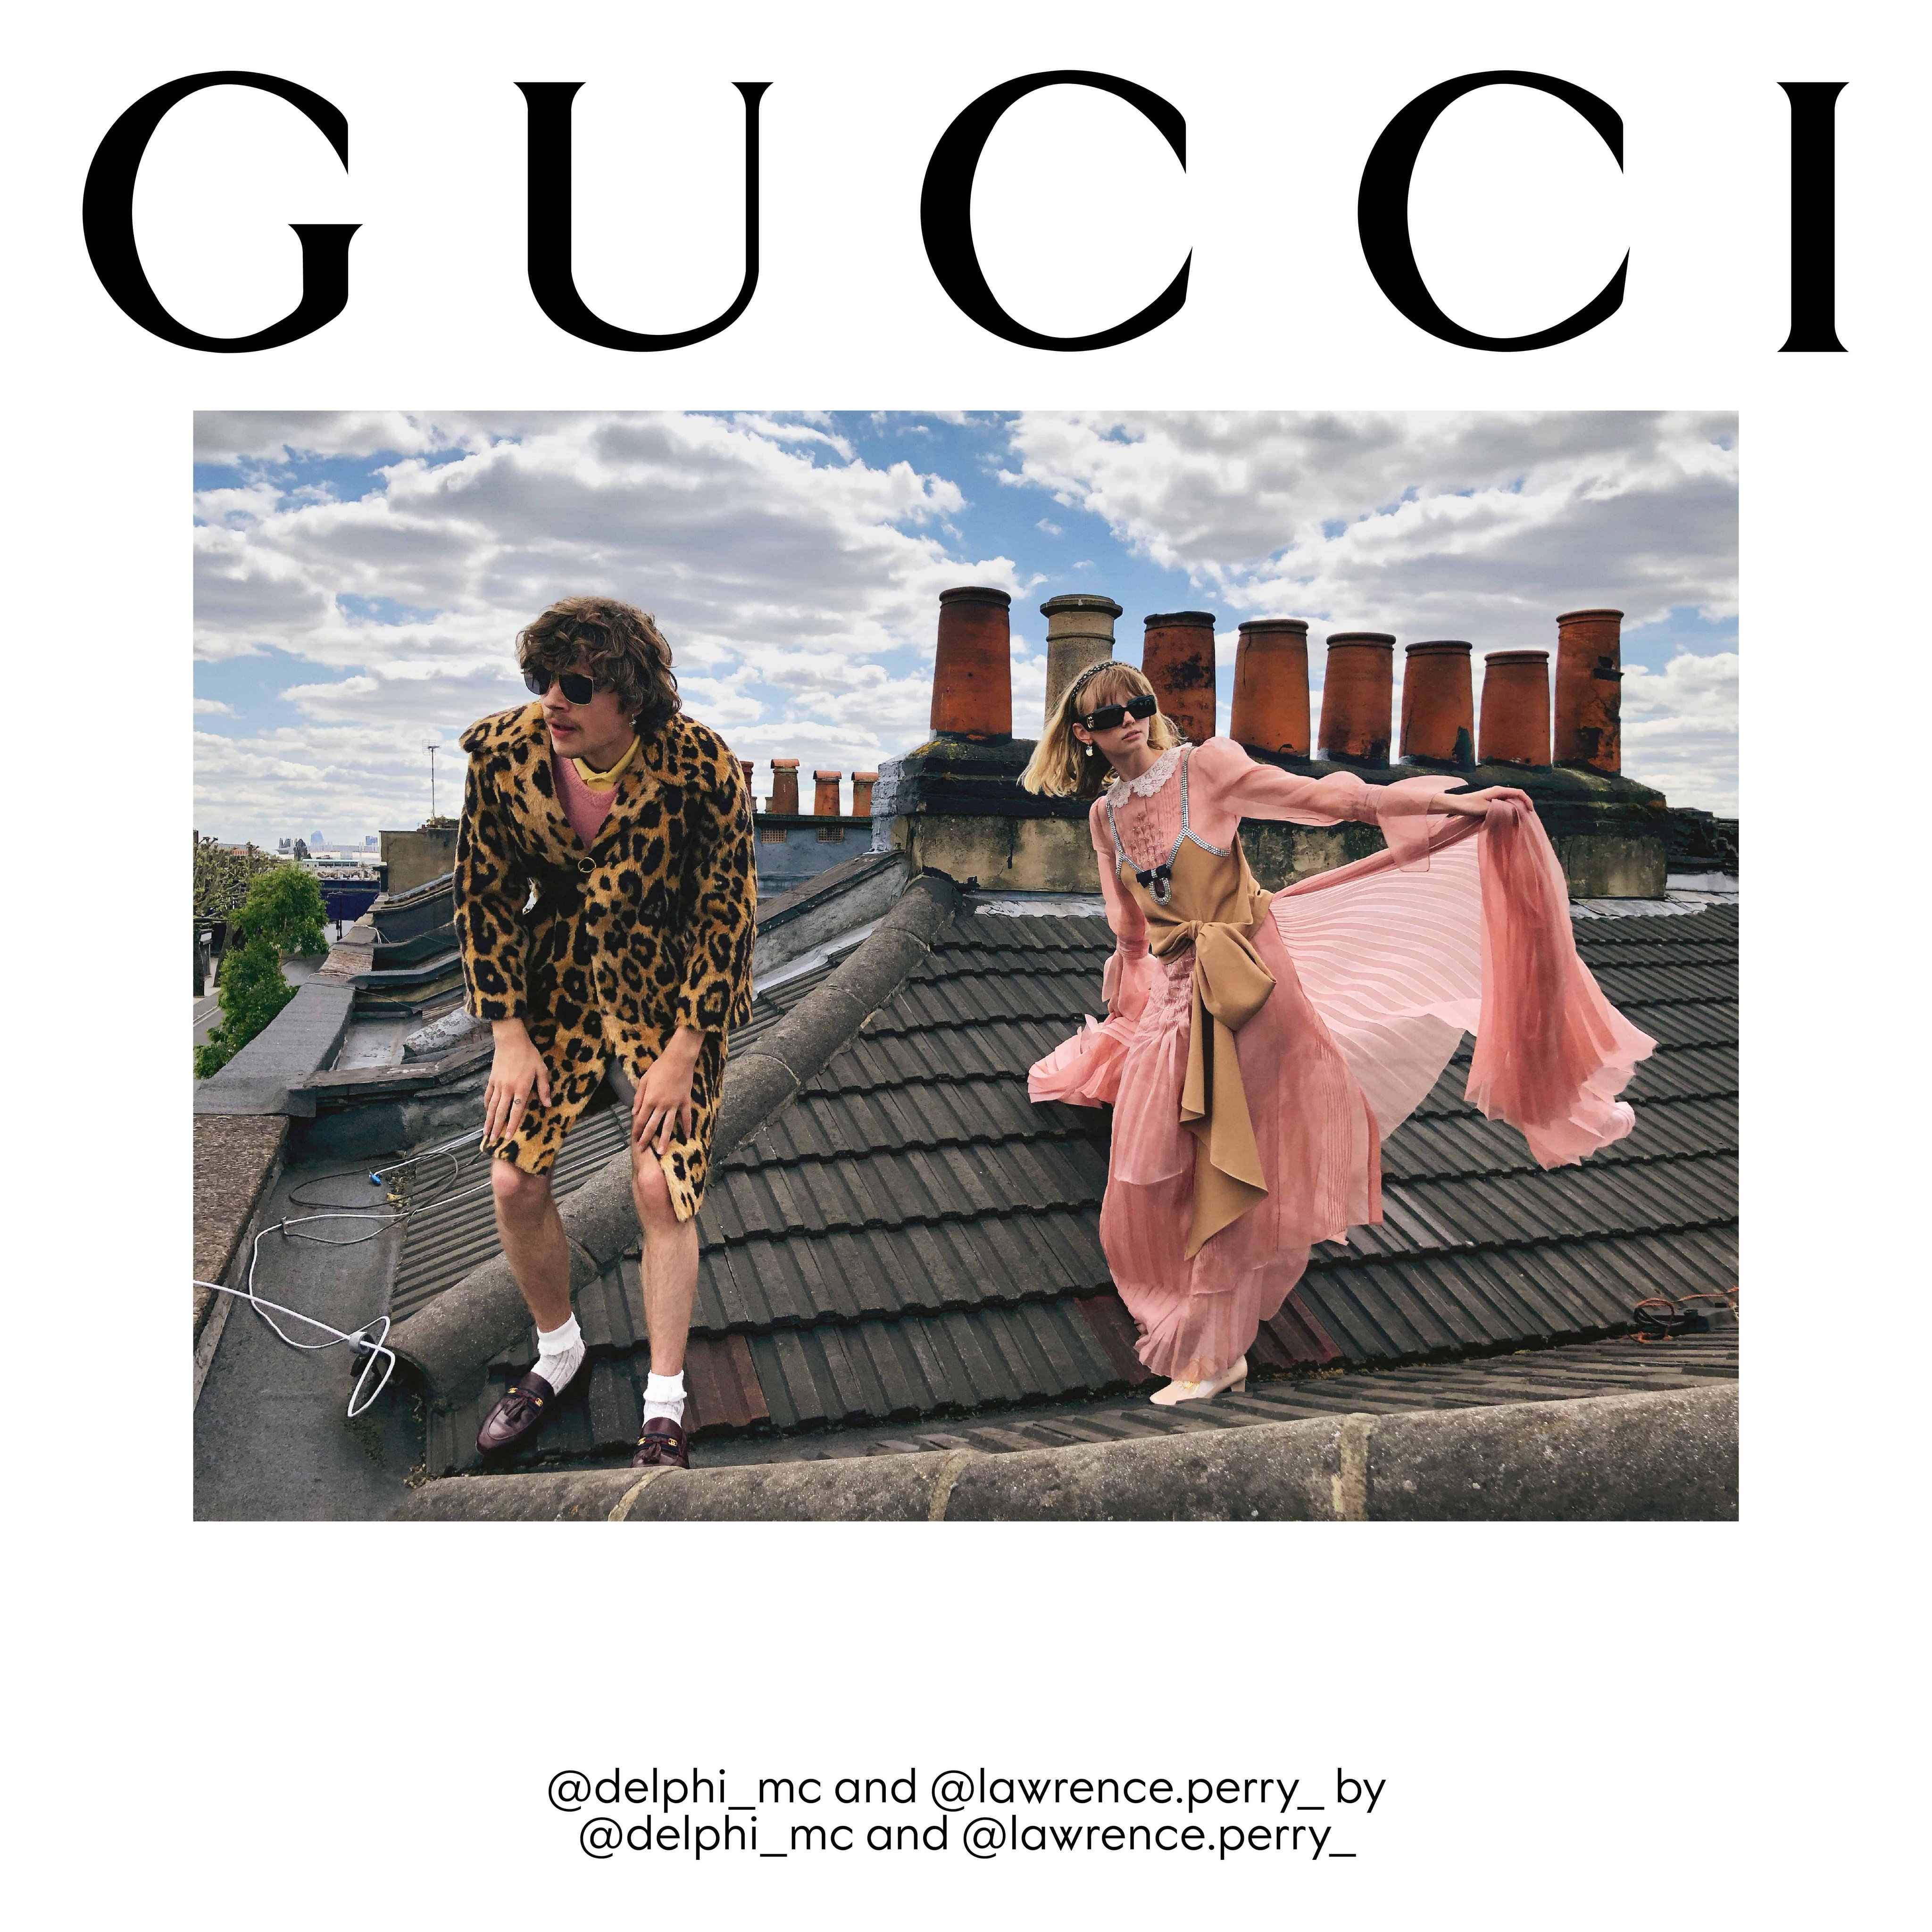 deadline skammel Charlotte Bronte gucci on Twitter: "Characters who have embodied #AlessandroMichele's  stories for years are the protagonists of the #GucciFW20 campaign  #GucciTheRitual. #GucciCommunity https://t.co/CwFSpxzGDs" / Twitter